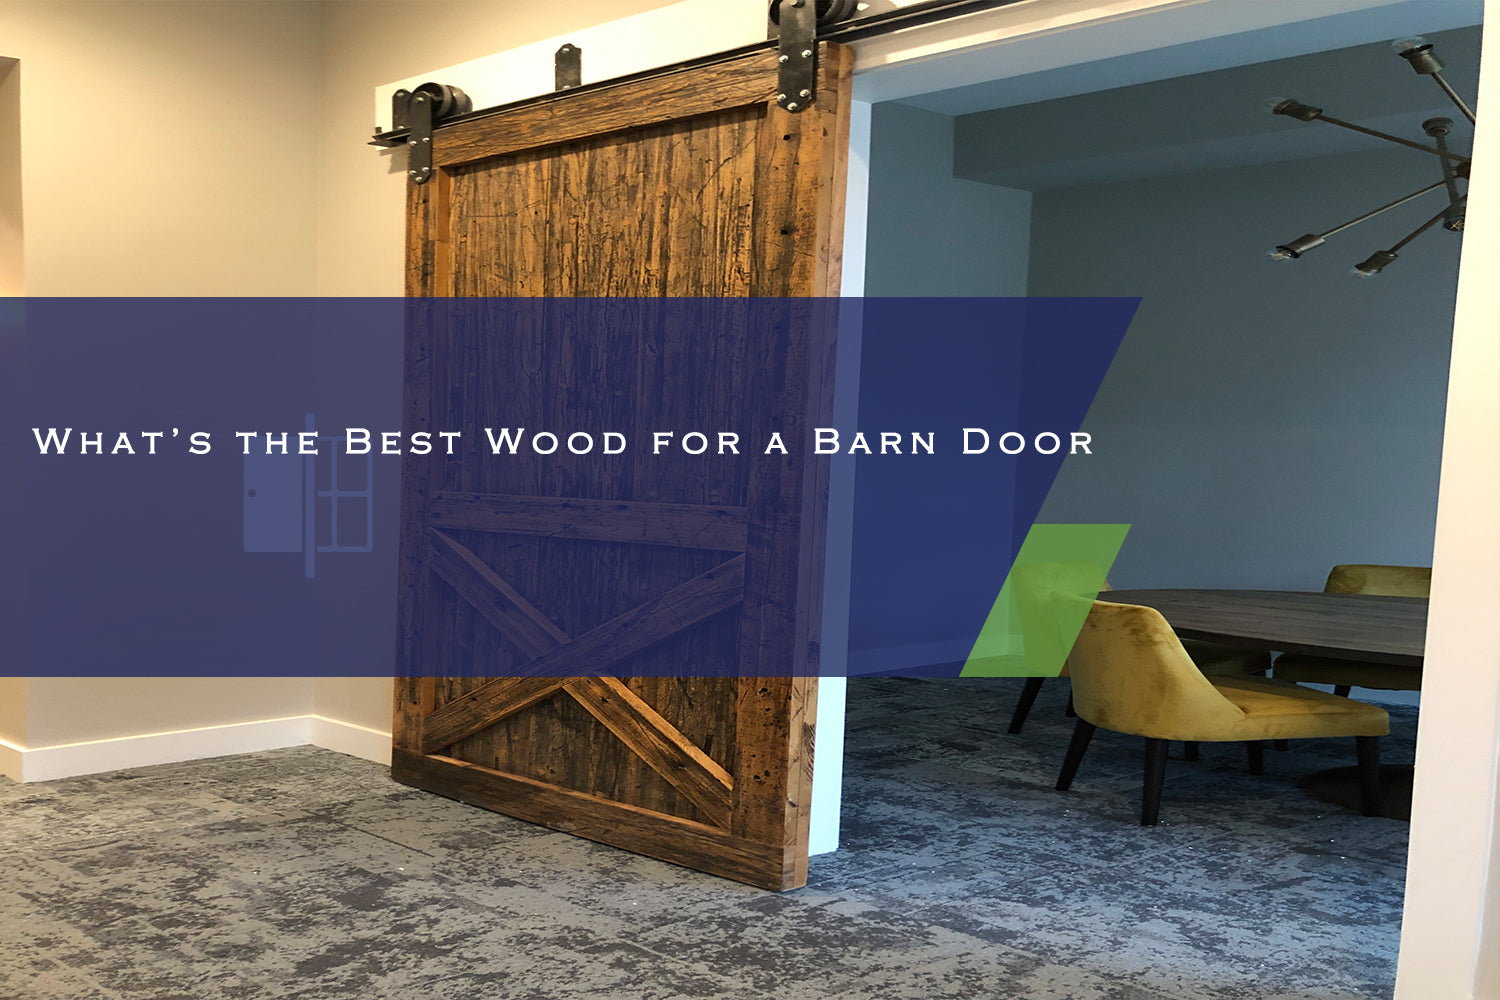 What’s the Best Wood for a Barn Door?